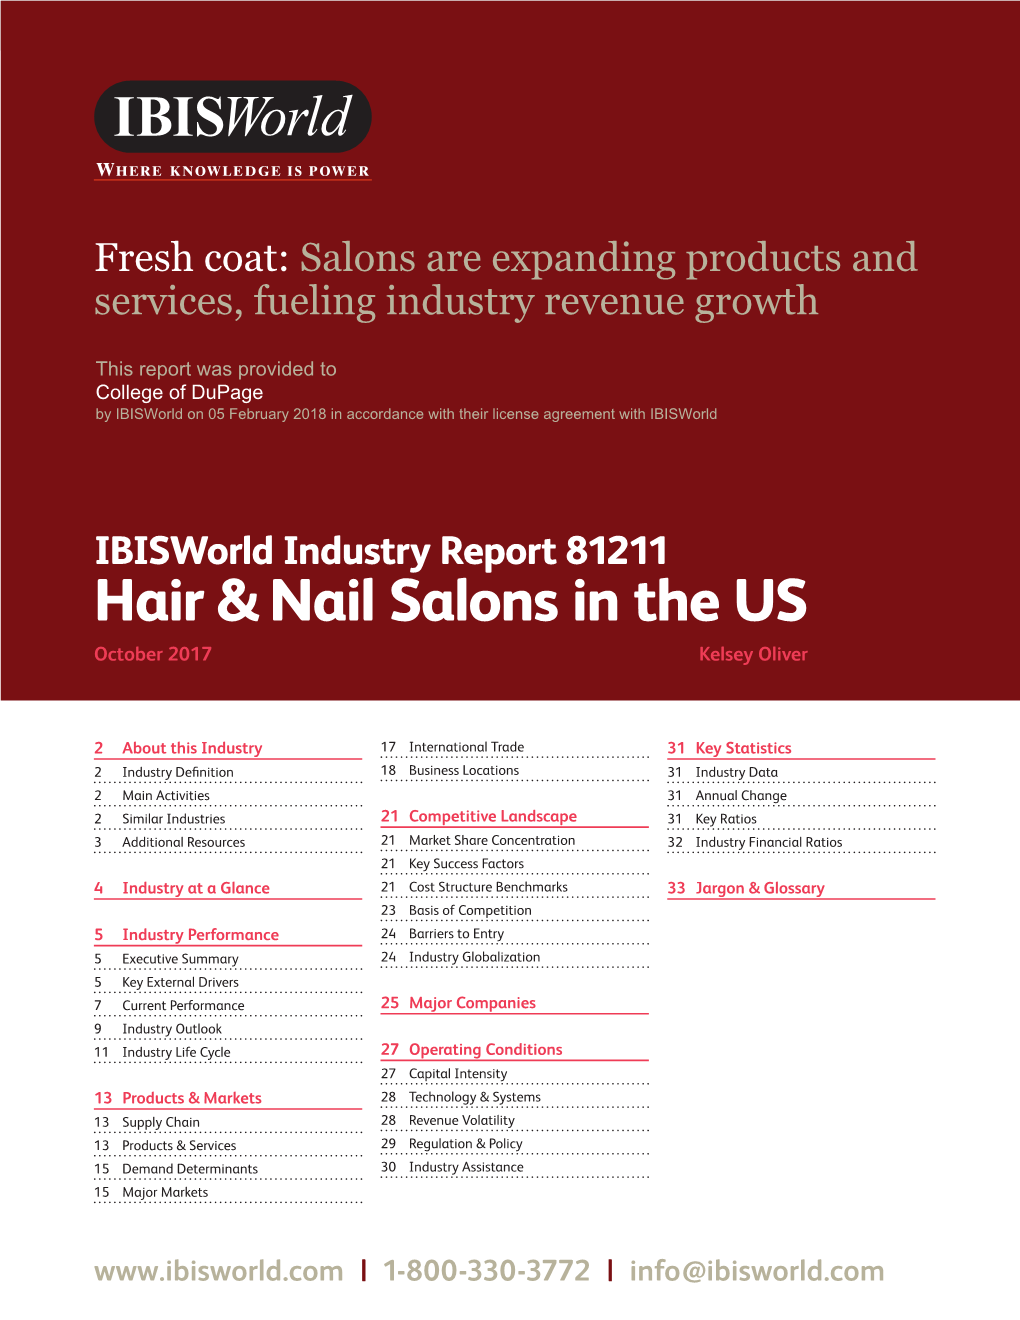 Hair and Nail Salon Industry in the U.S